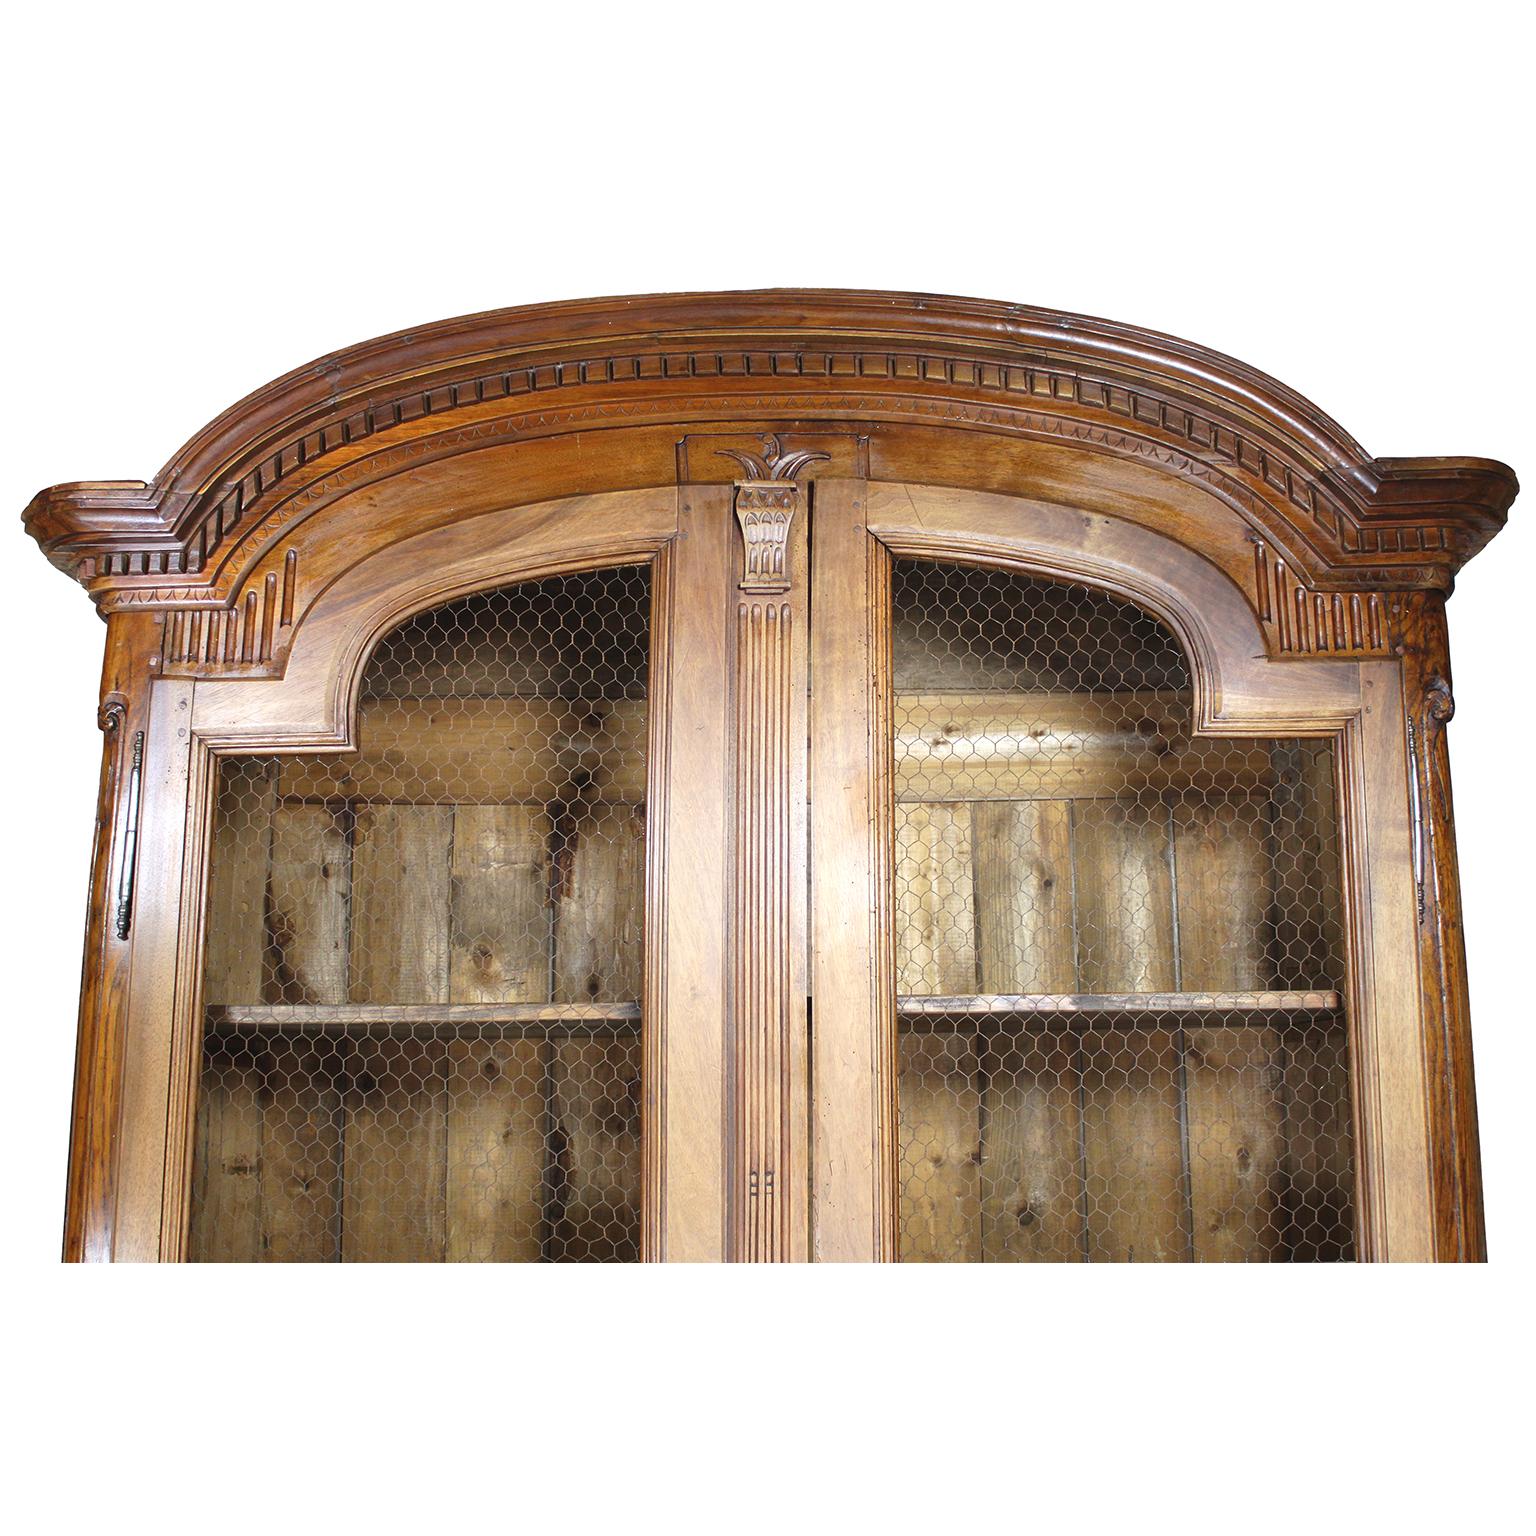 French 18th Century Louis XV Style Provincial - Country French Armoire Bookcase In Good Condition For Sale In Los Angeles, CA